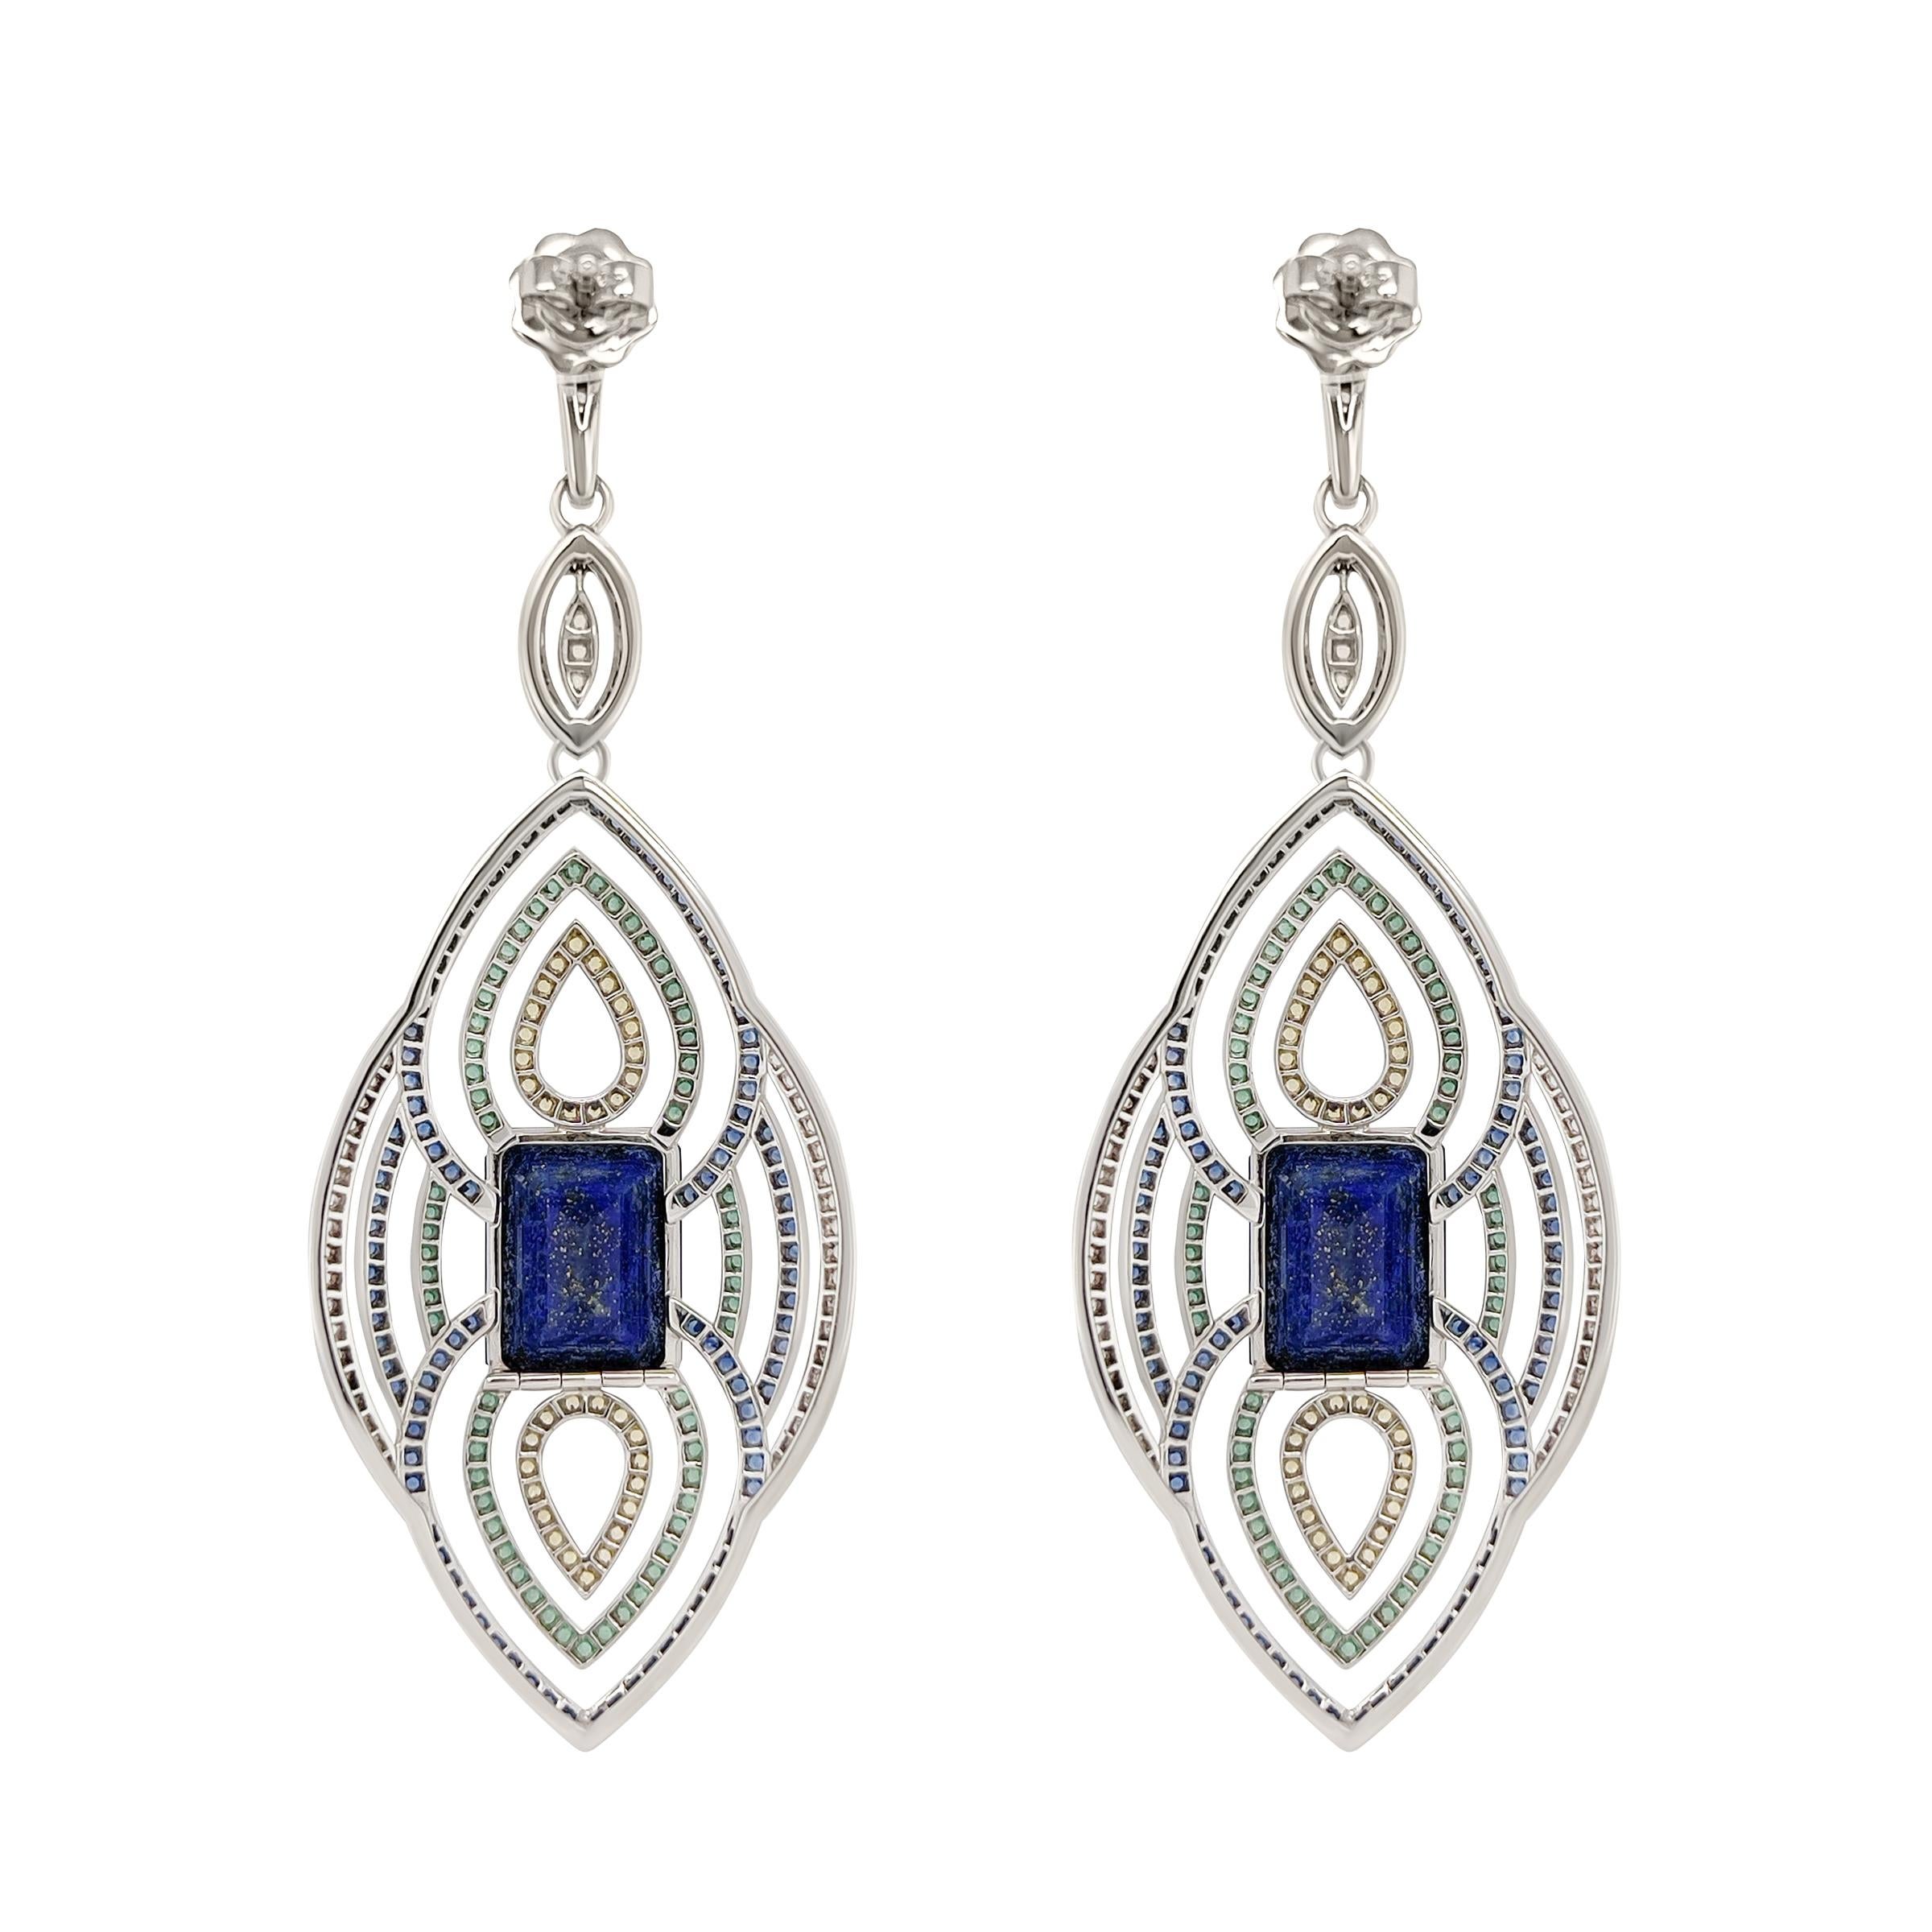 Natural blue, yellow, white and green sapphires and diamonds are pave set around this pair of 18k white gold and lapis earrings. Inspired by ancient Egypt, the centre stone of lapis weighing a total of 19.56 carats.
